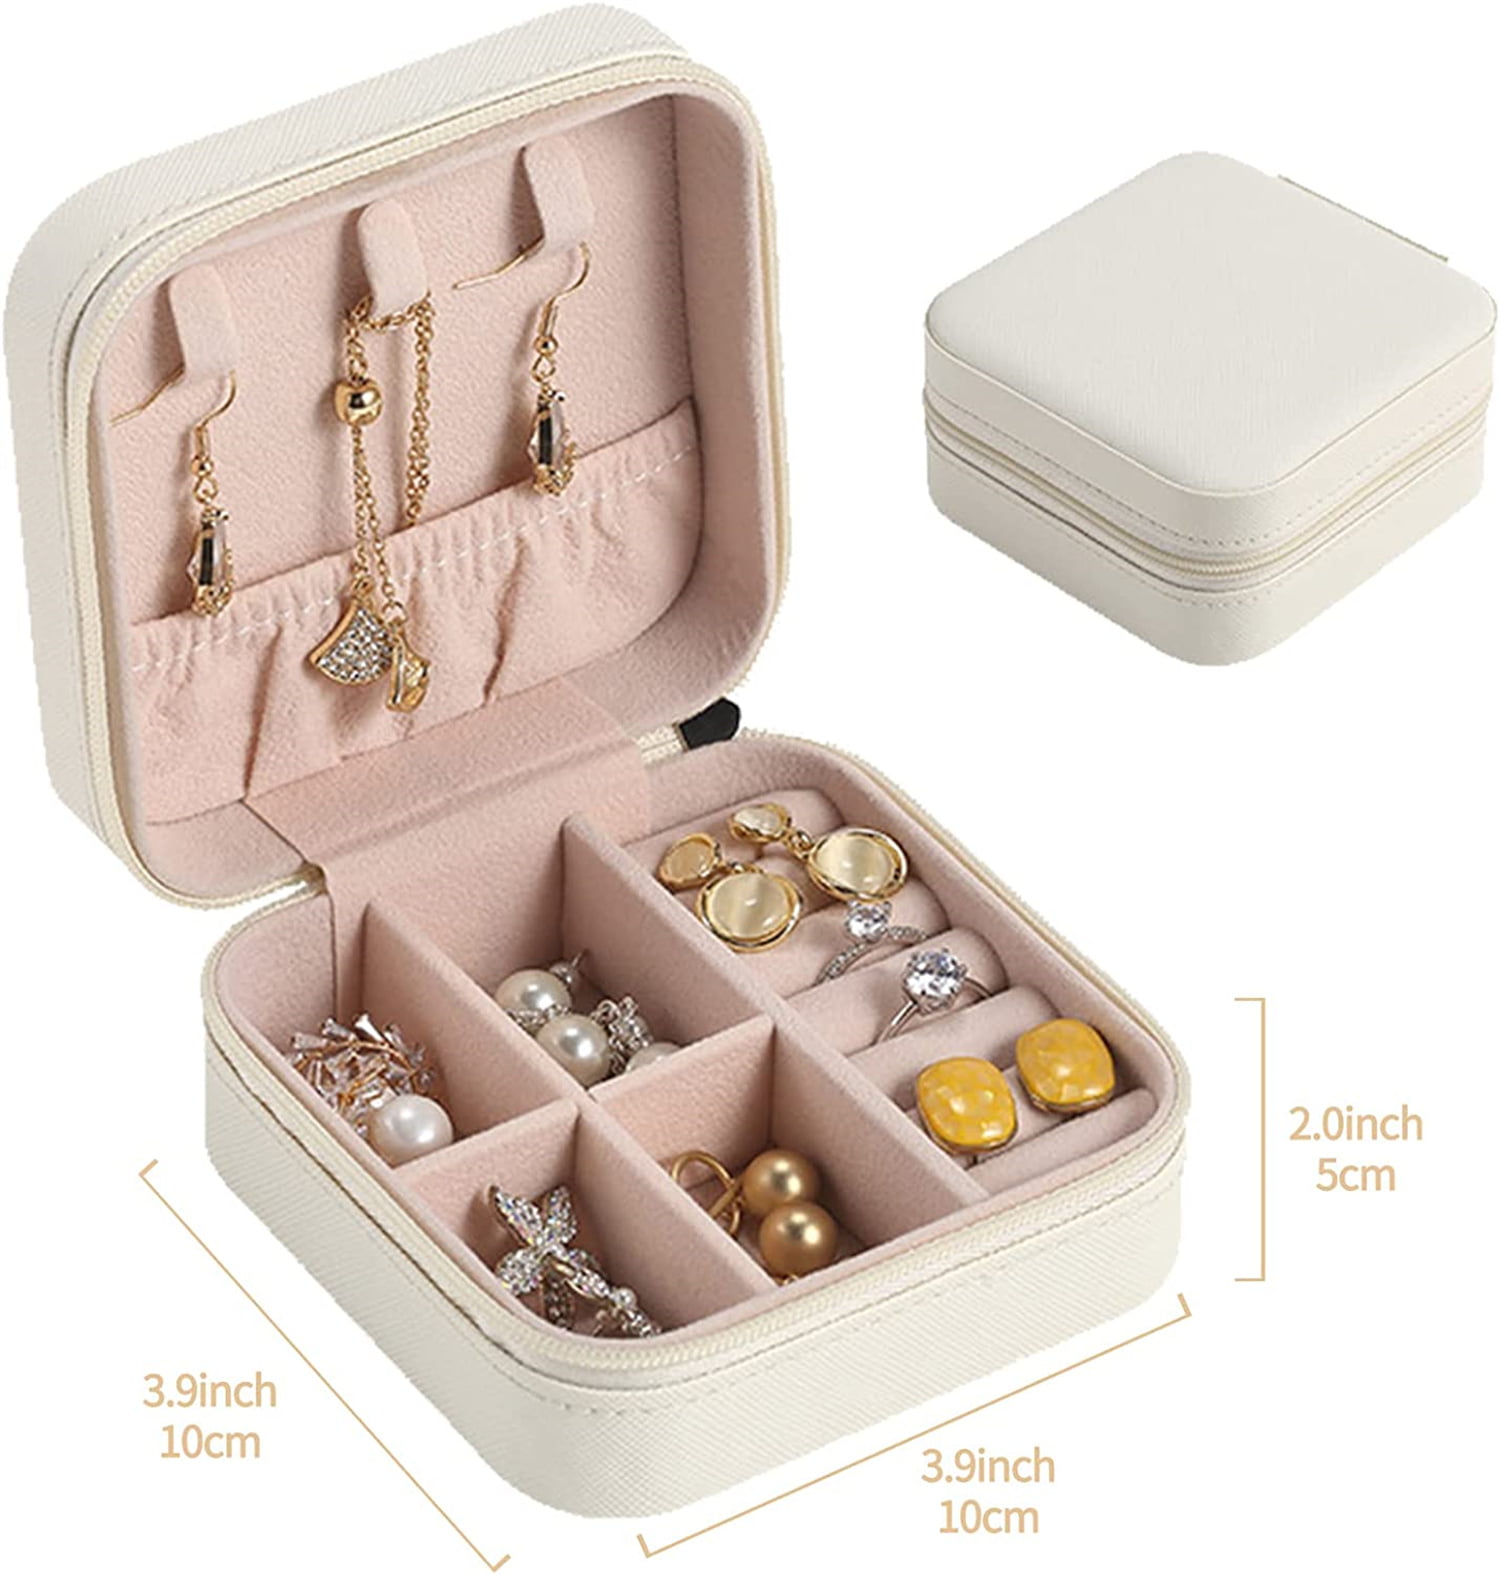 KCY Jewelry Box for Women Girls,Small Travel Jewelry Organizer Case,PU  Leather Portable Jewellery Storage Boxes Display Holder for Ring Earrings